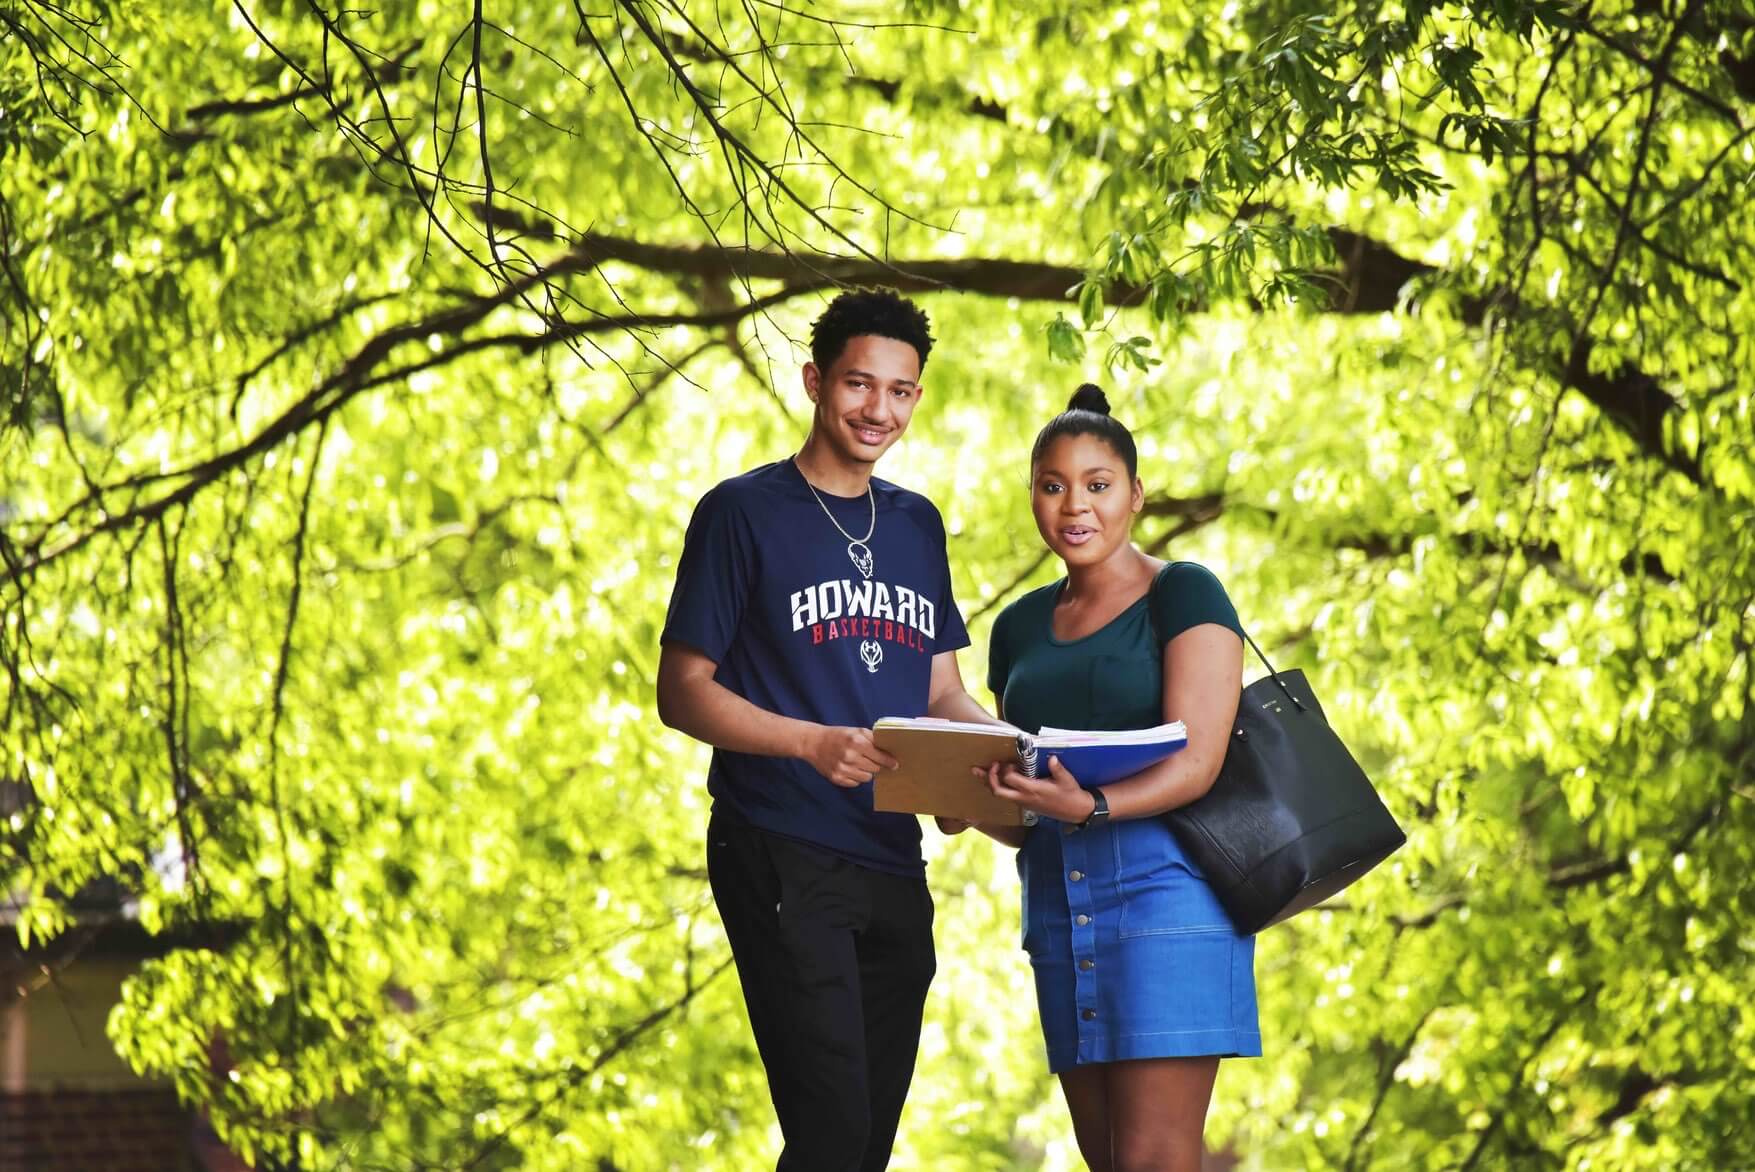 Howard students smile under green tree